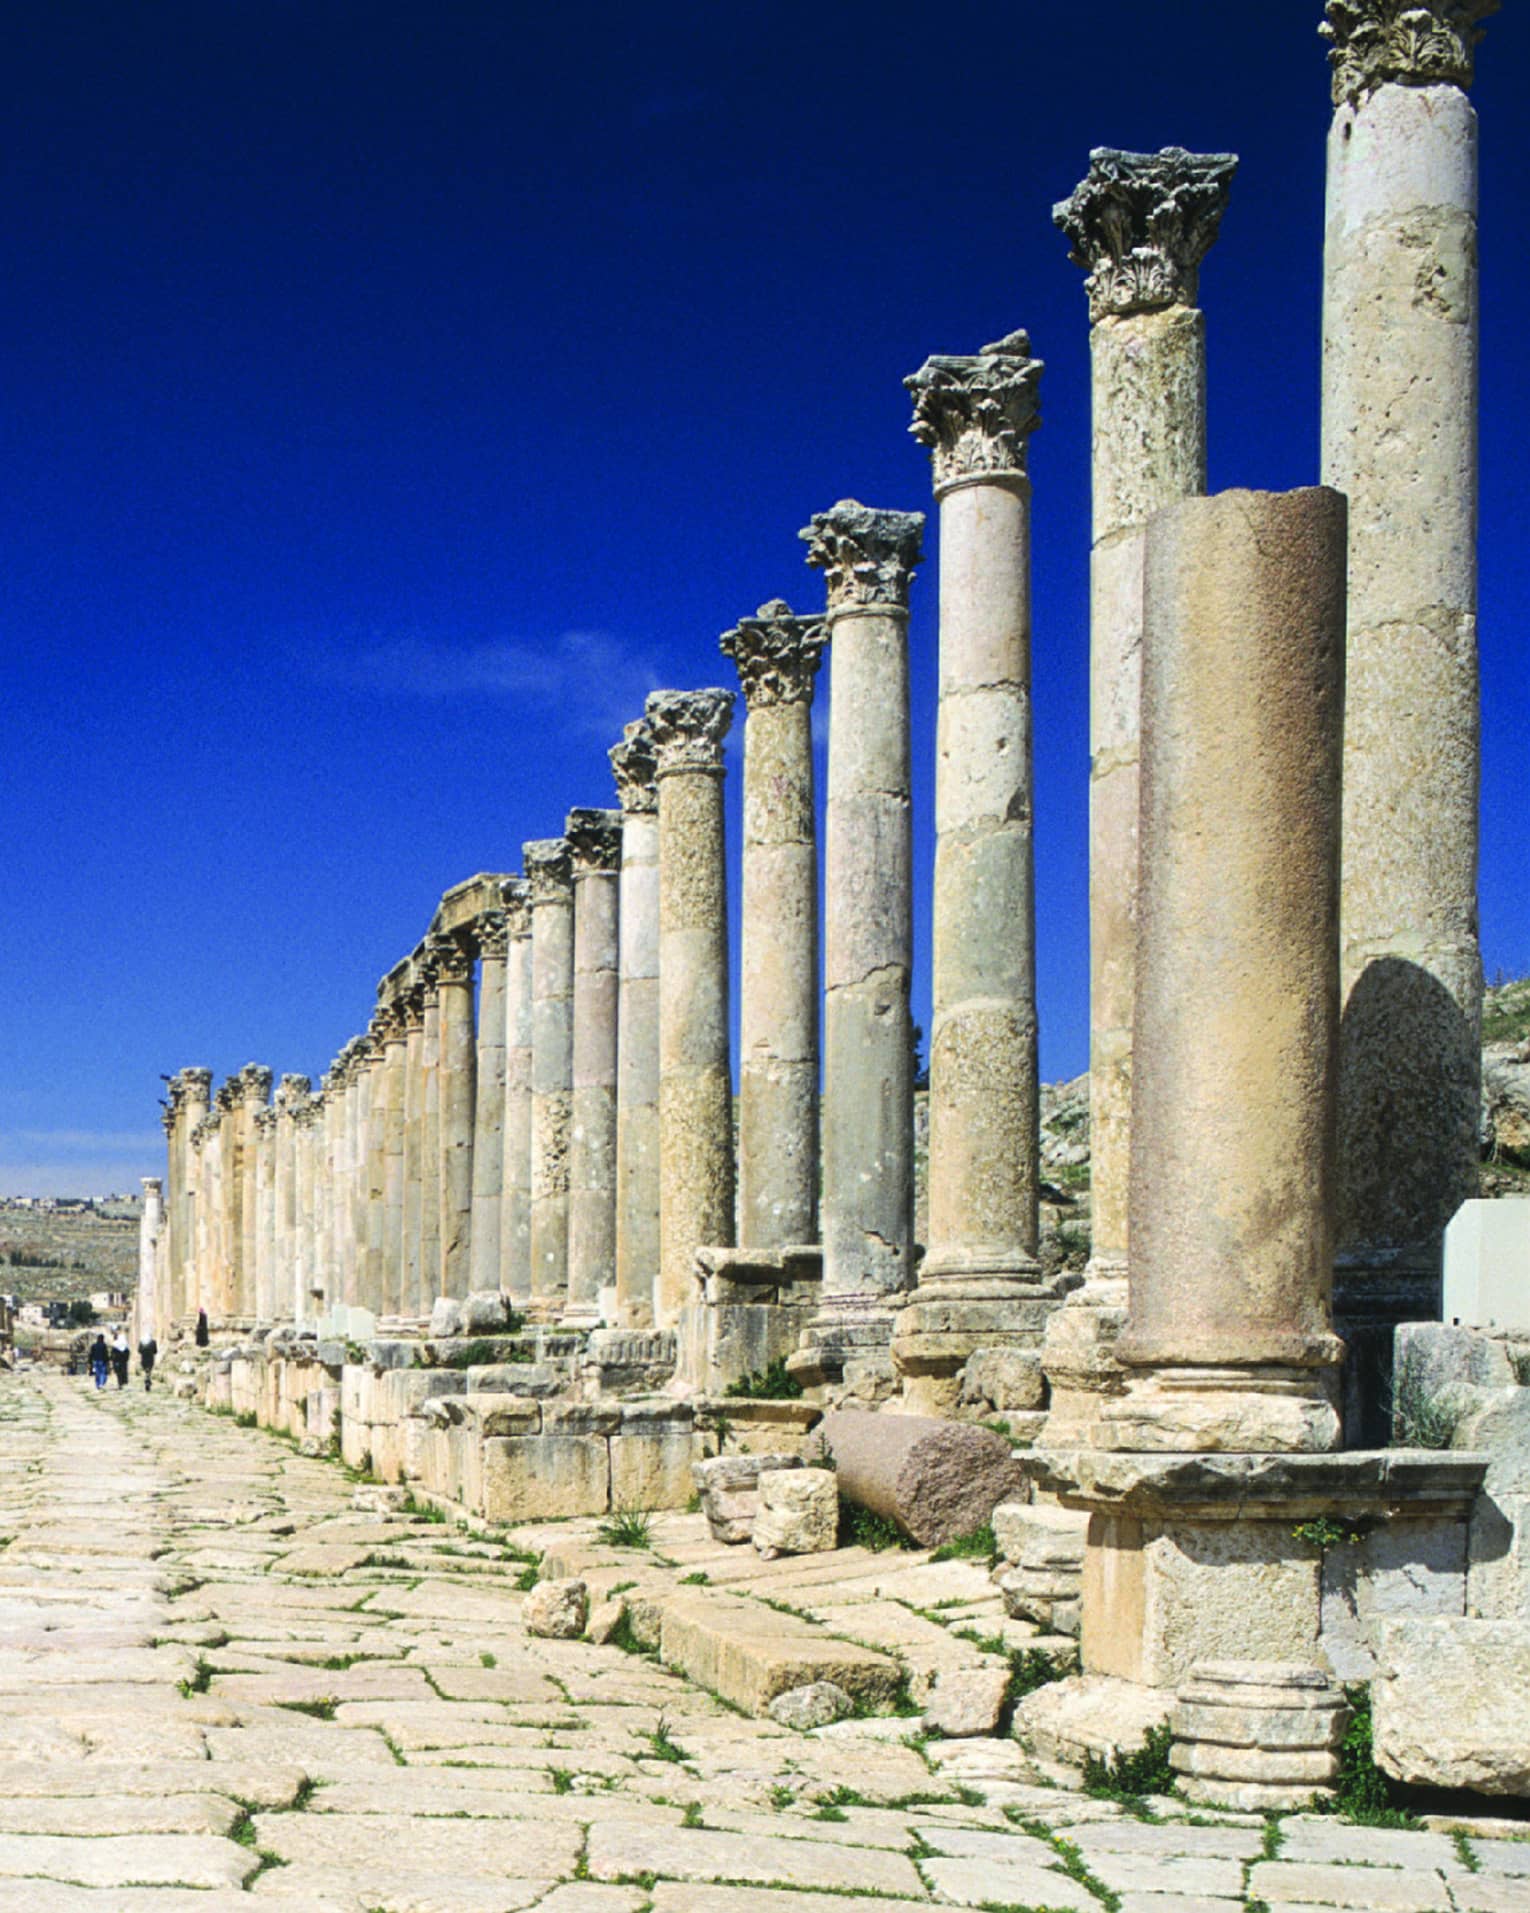 A series of pillars aligning a stone walkway.